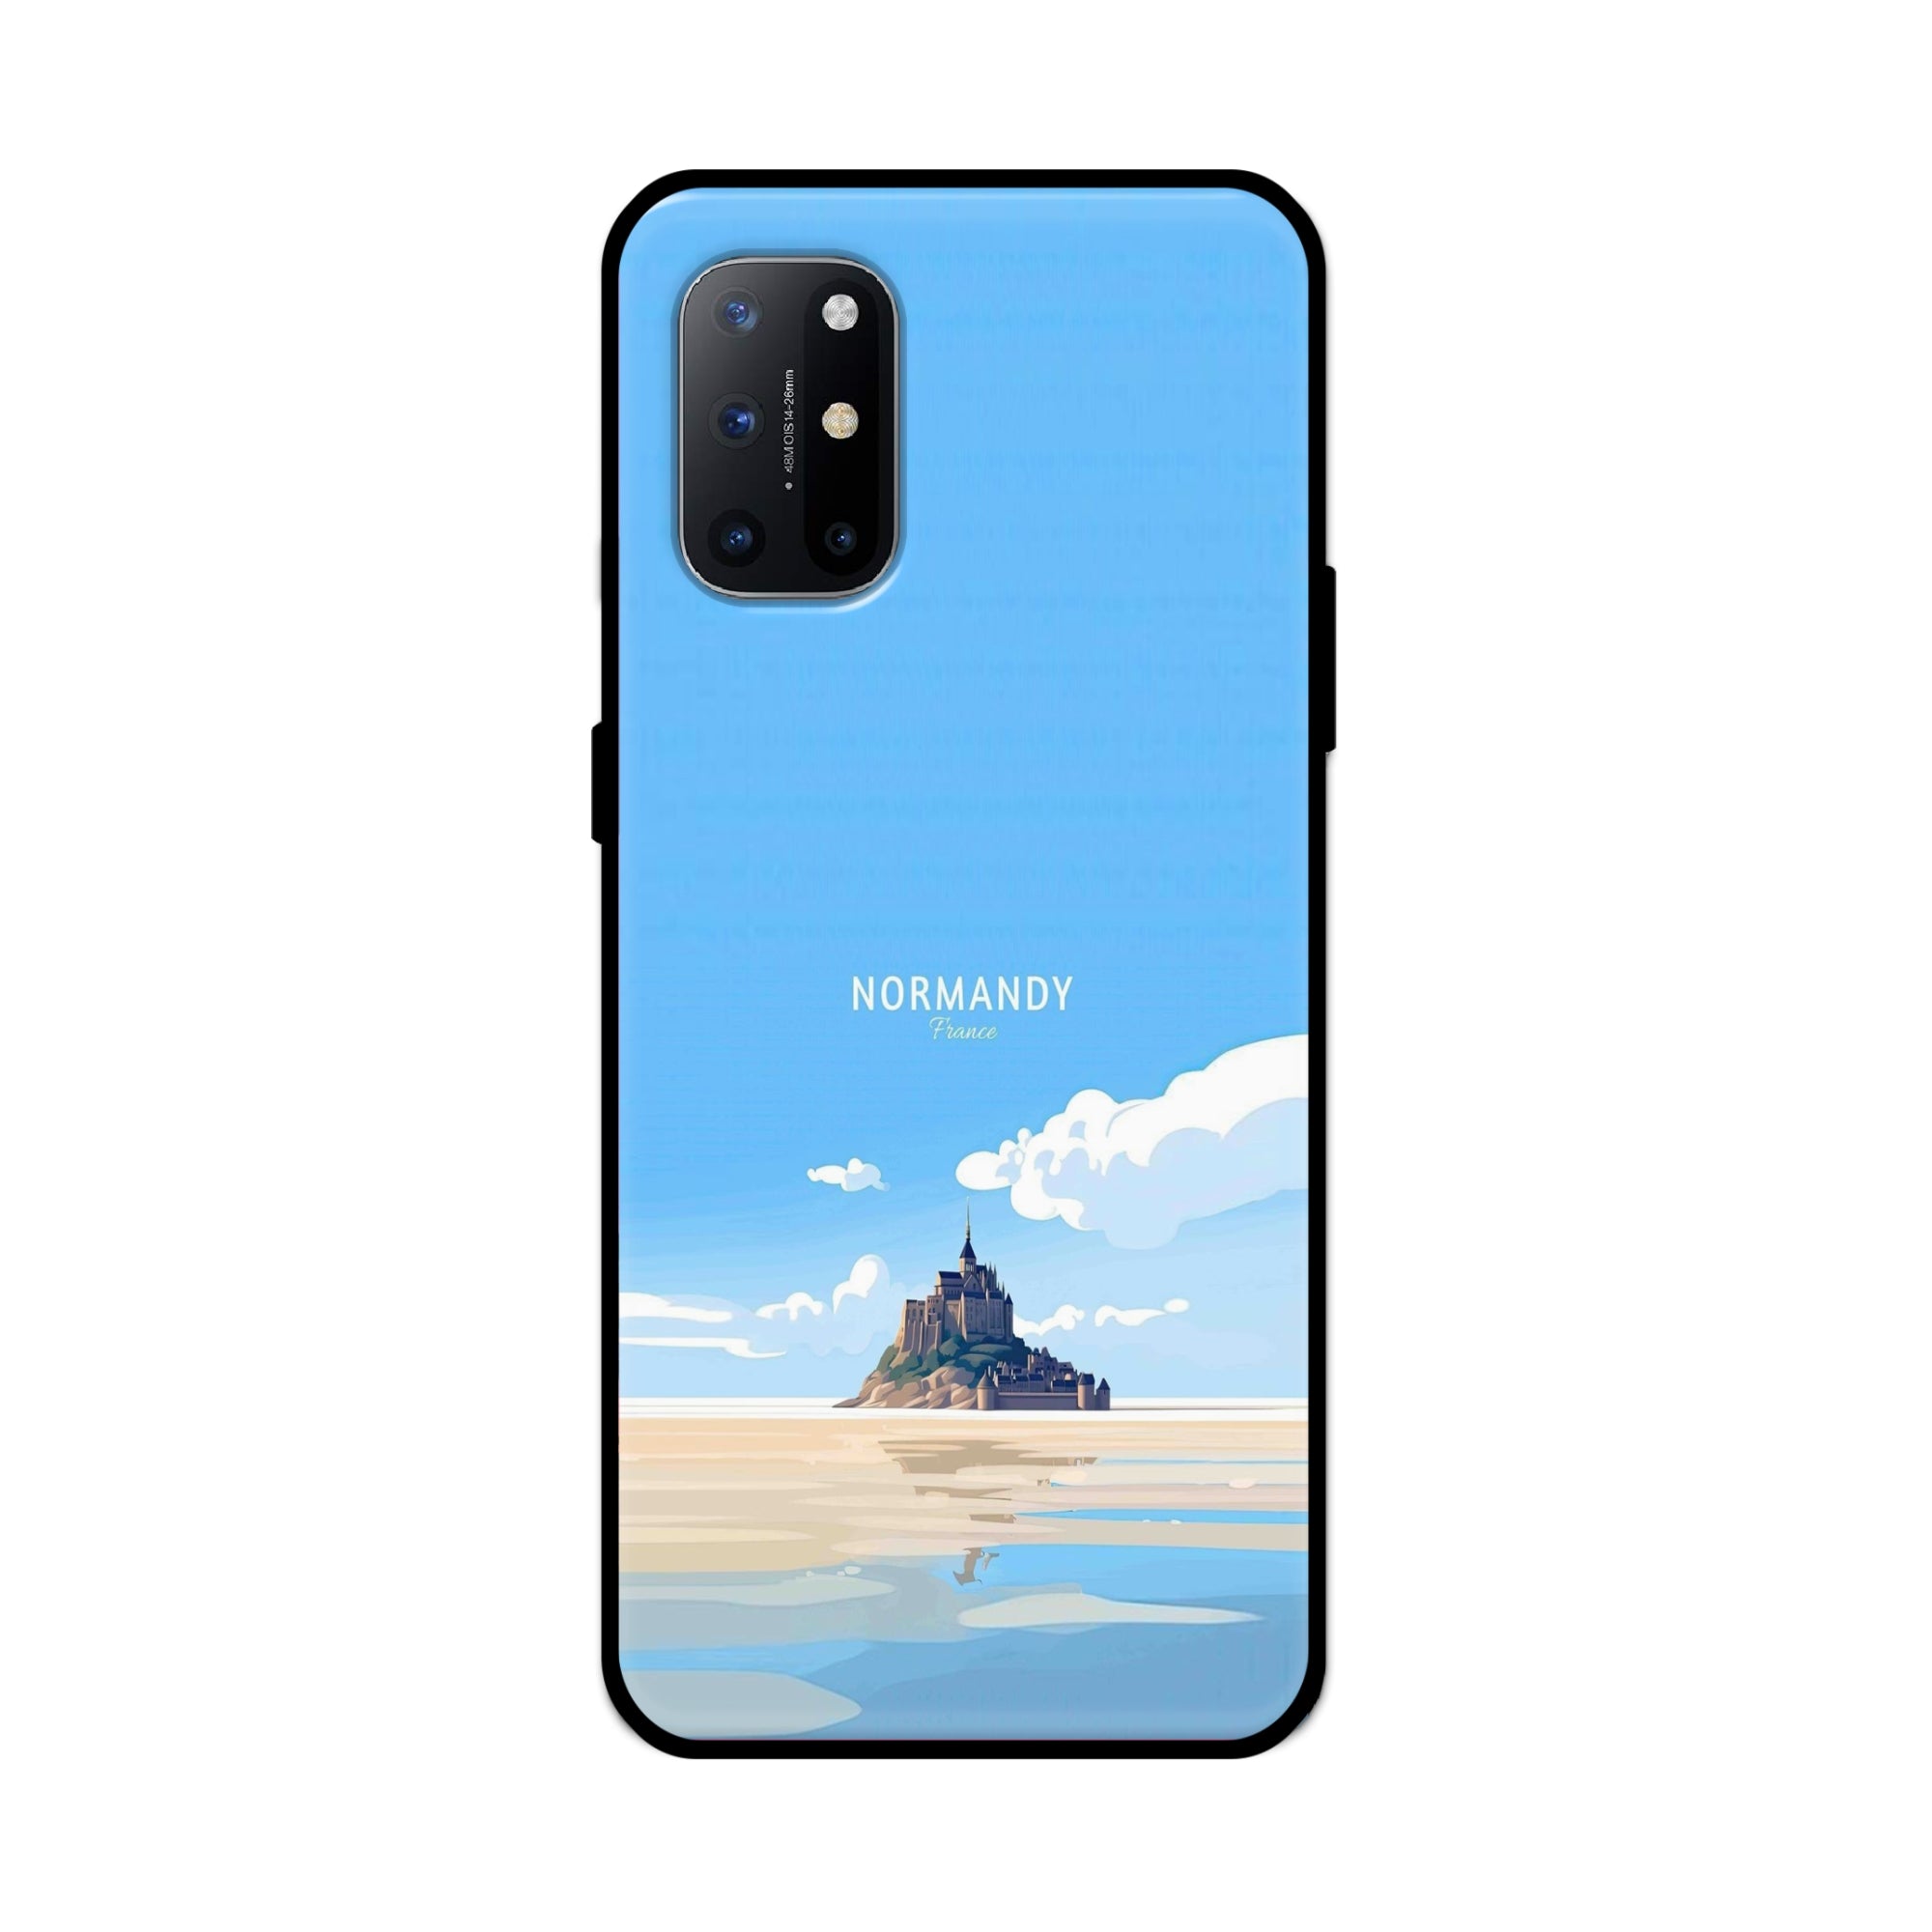 Buy Normandy Metal-Silicon Back Mobile Phone Case/Cover For Oneplus 9R / 8T Online